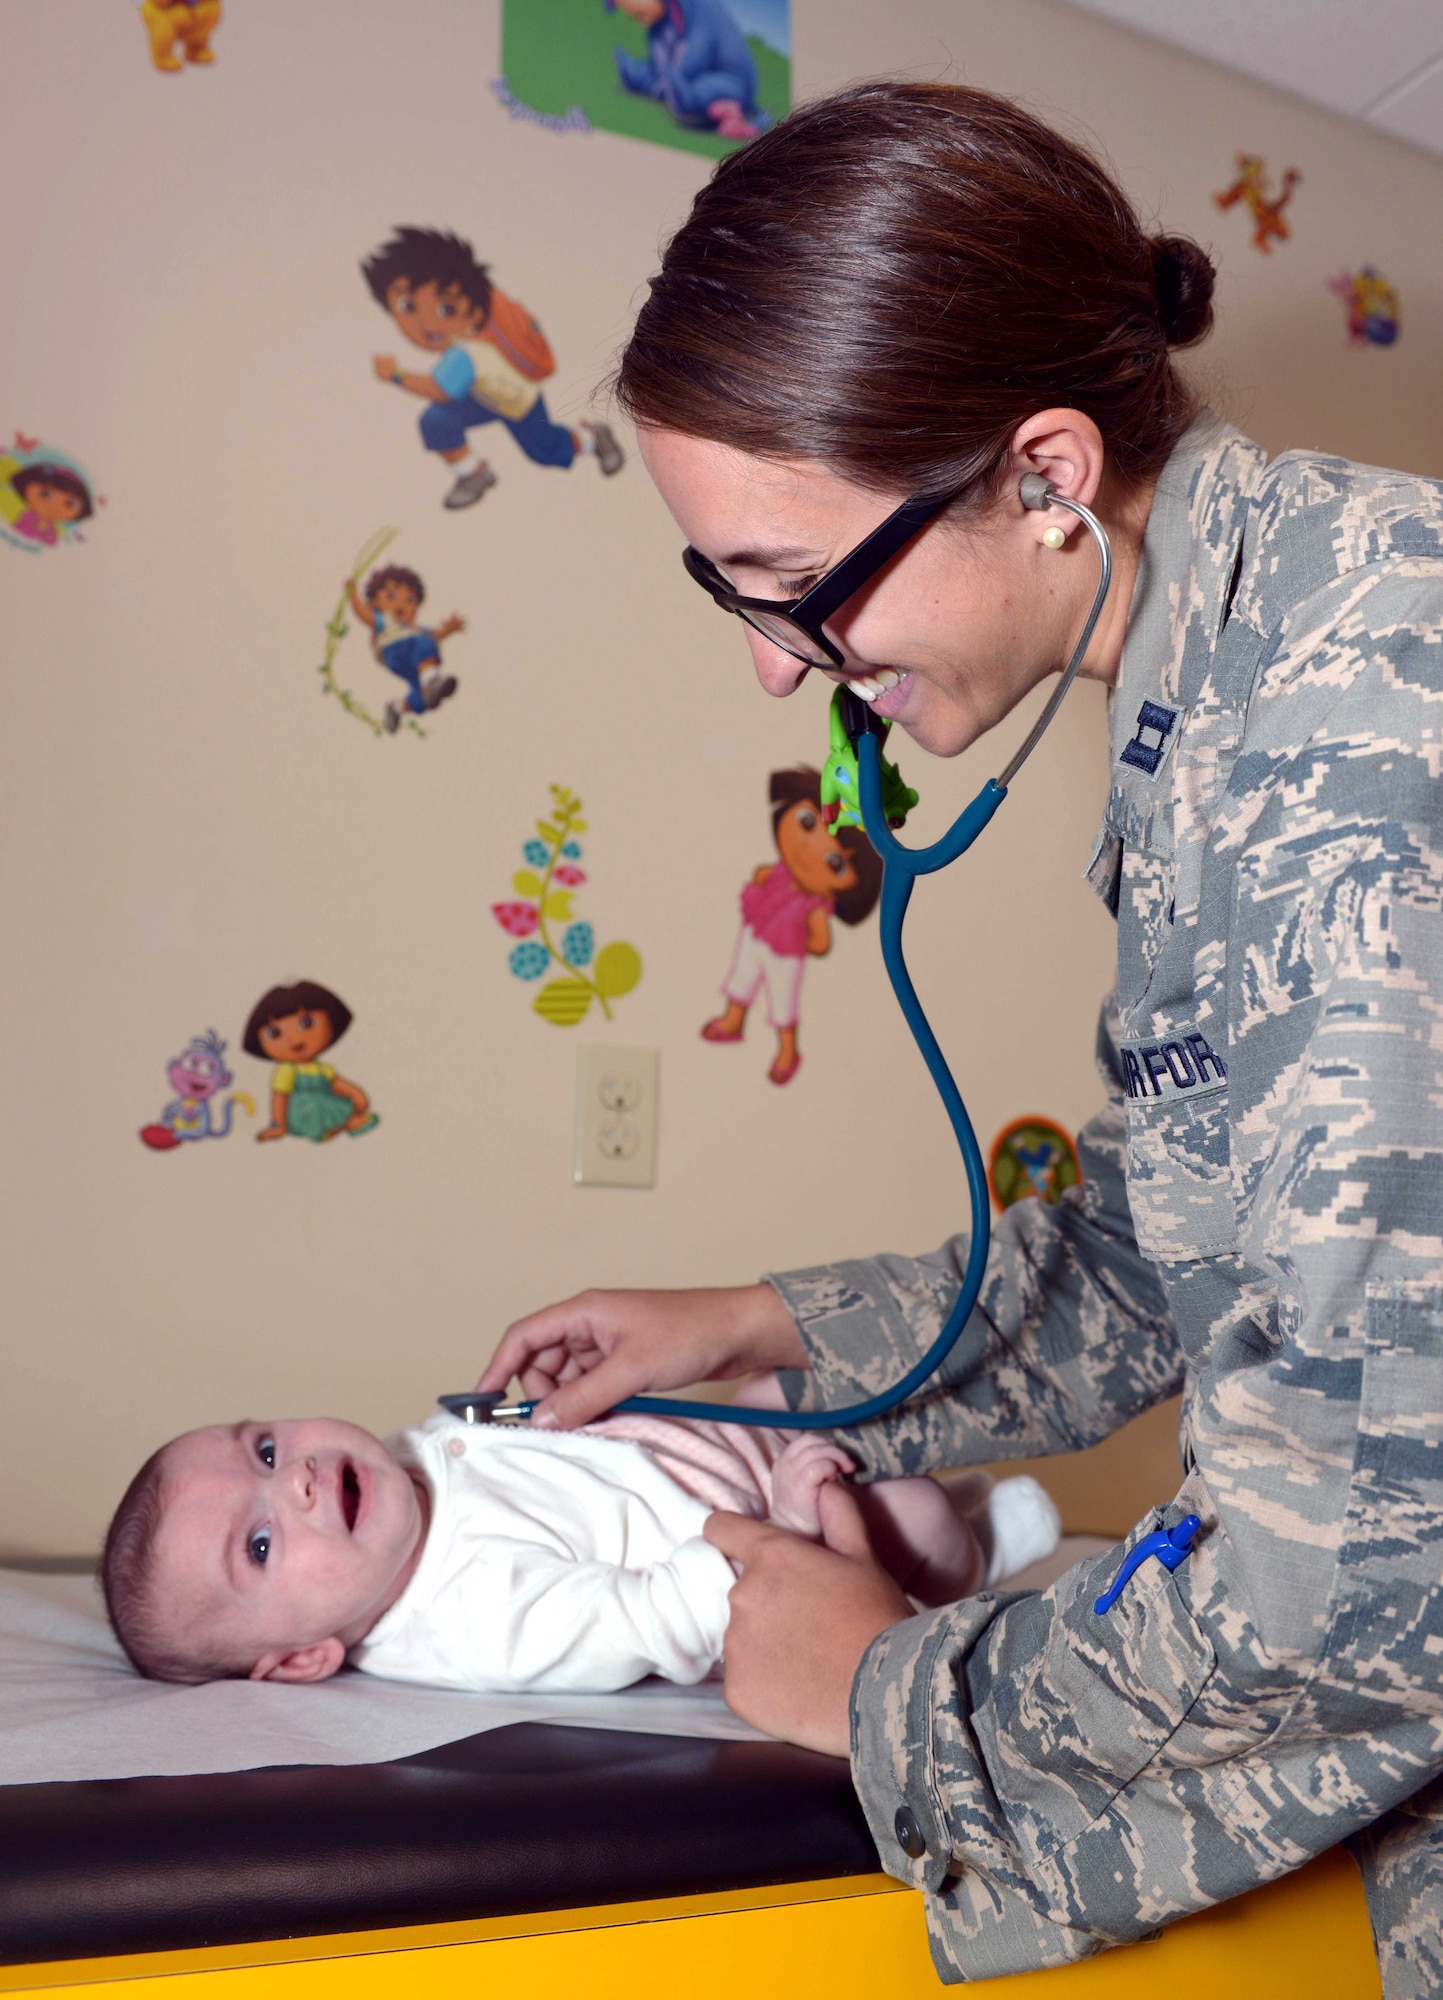 Capt. Megan McDonald, a pediatrician with the 28th Medical Group, performs a check-up on a child at Ellsworth Air Force Base, S.D., Sept. 8, 2016. McDonald graduated from the U.S. Air Force Academy in 2008, and attended medical school at Georgetown University School of Medicine. She later attended pediatric residency training at Dayton Children's Hospital at Wright Patterson Air Force Base, Ohio, the nation's only fully integrated military-civilian residency training program. (U.S. Air Force photo by Airman 1st Class Donald C. Knechtel)